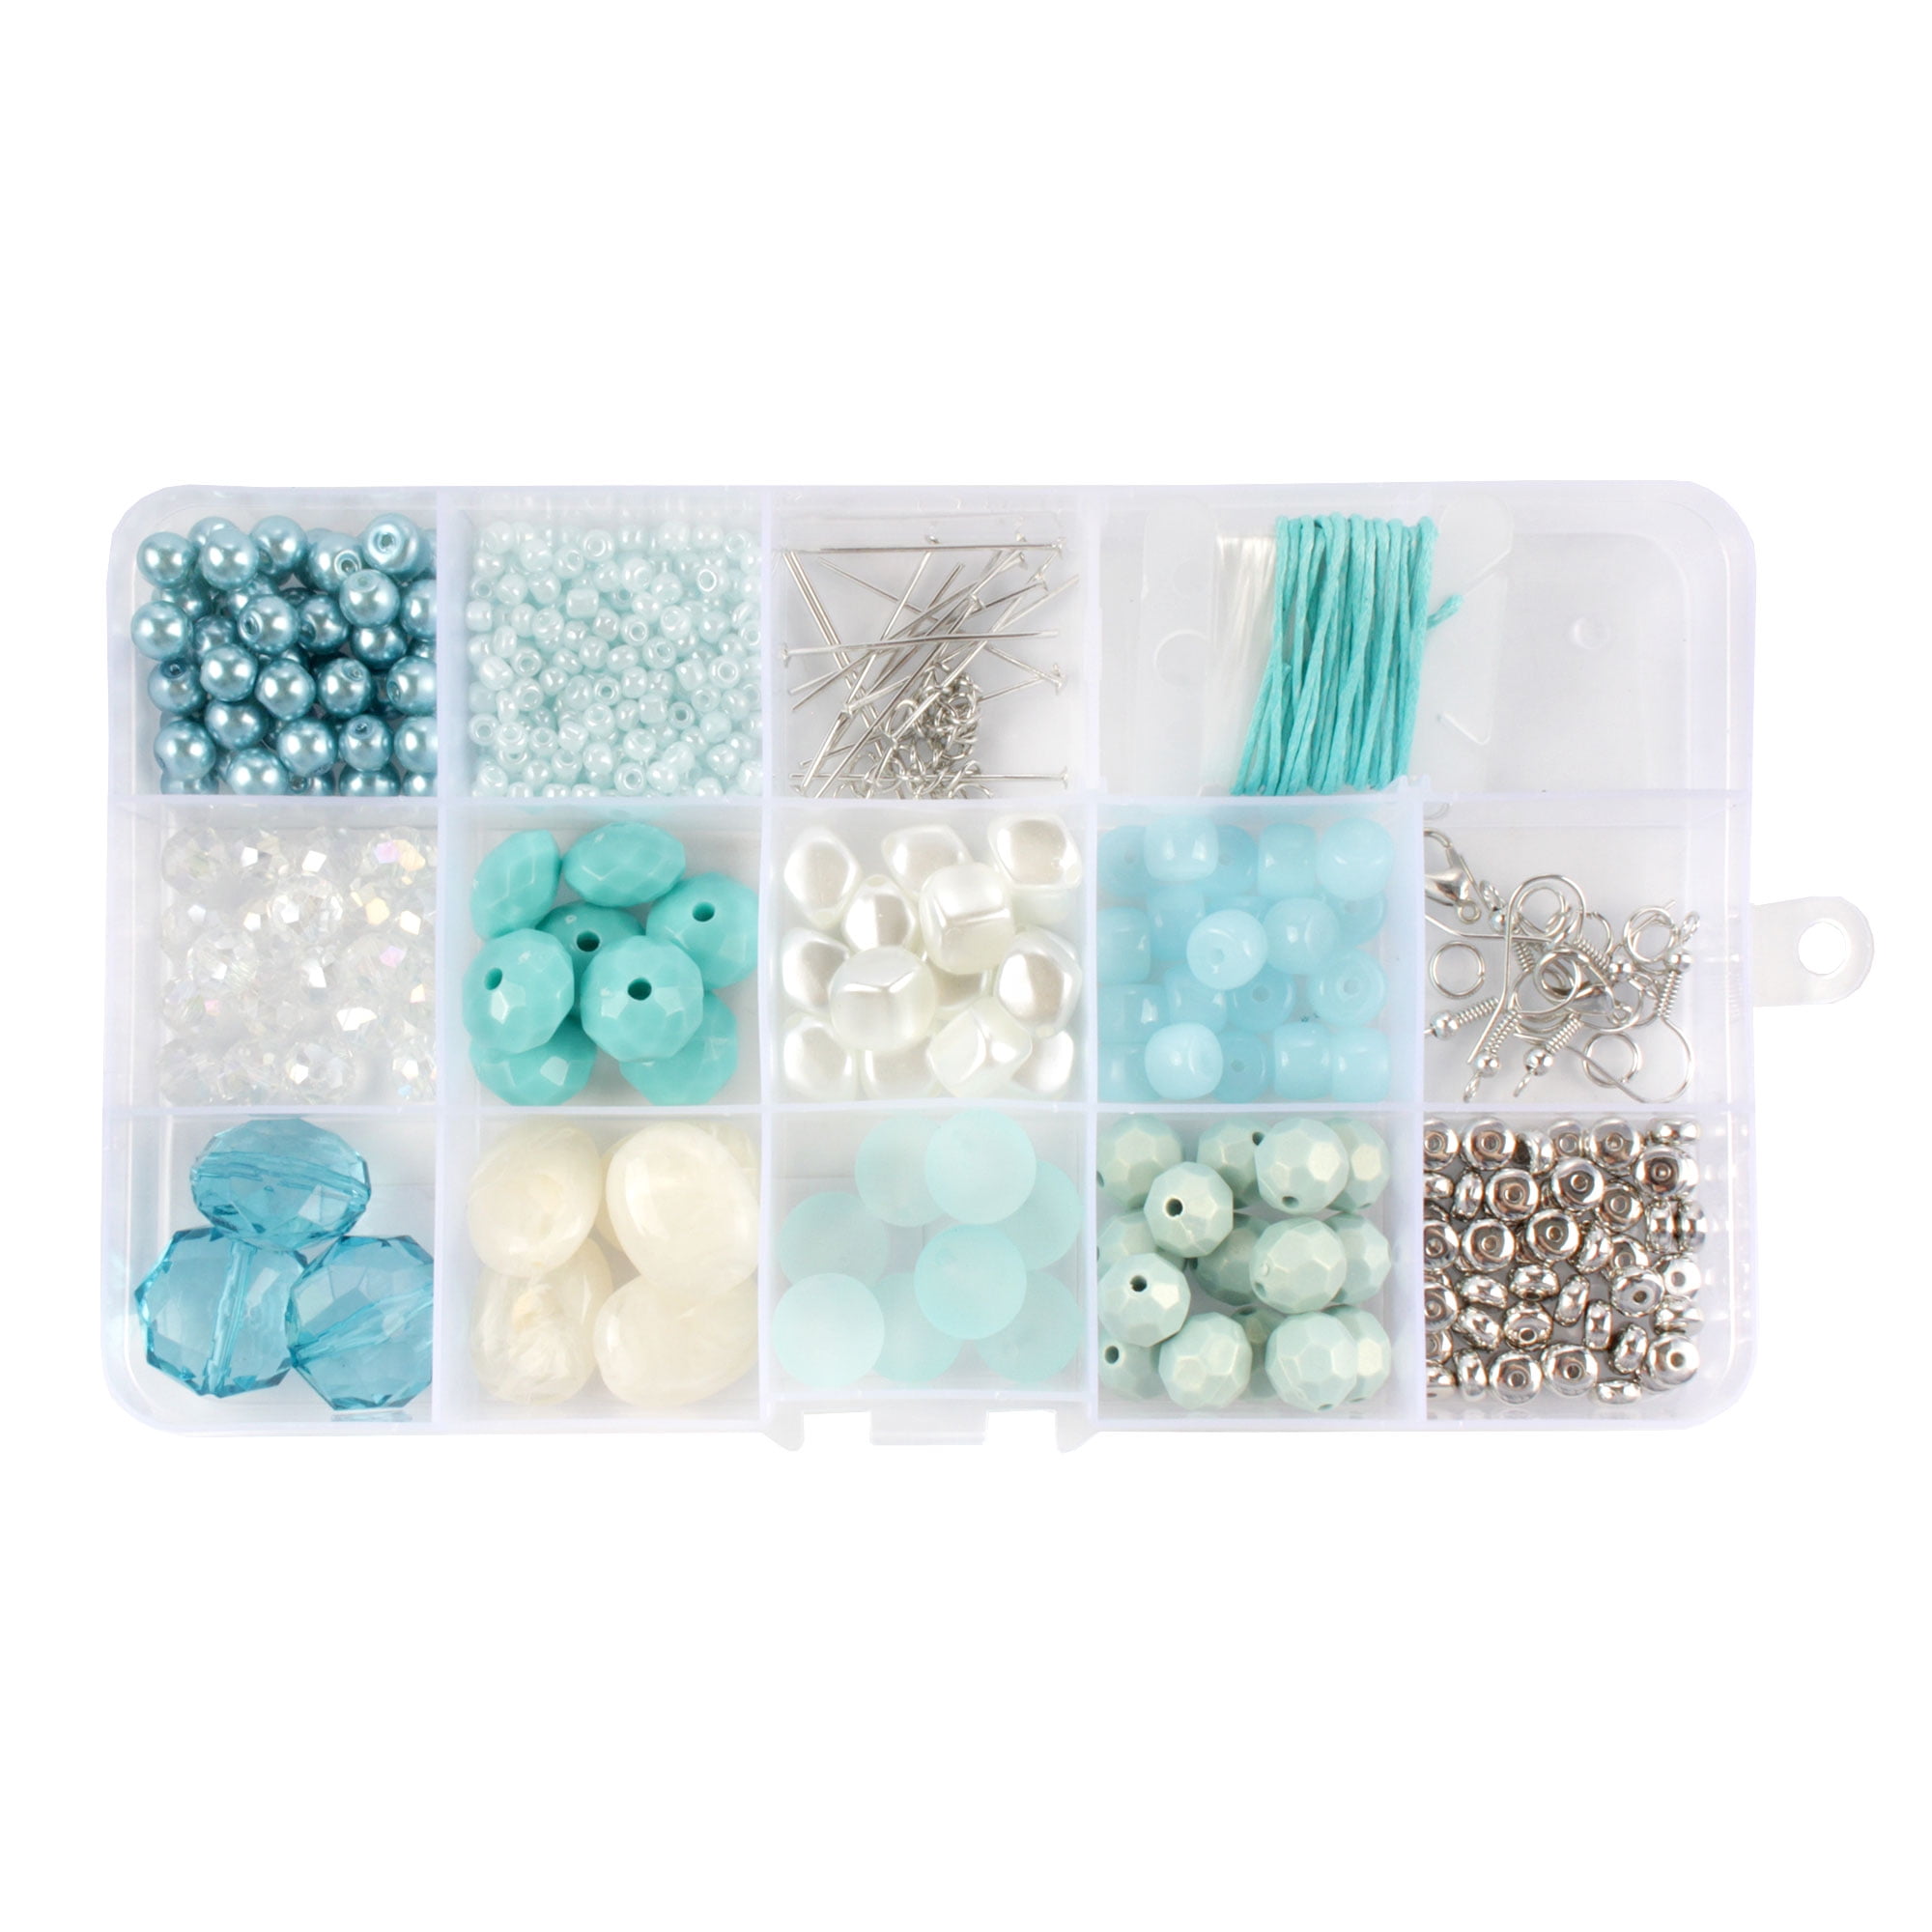 Jewelry beading kit - arts & crafts - by owner - sale - craigslist